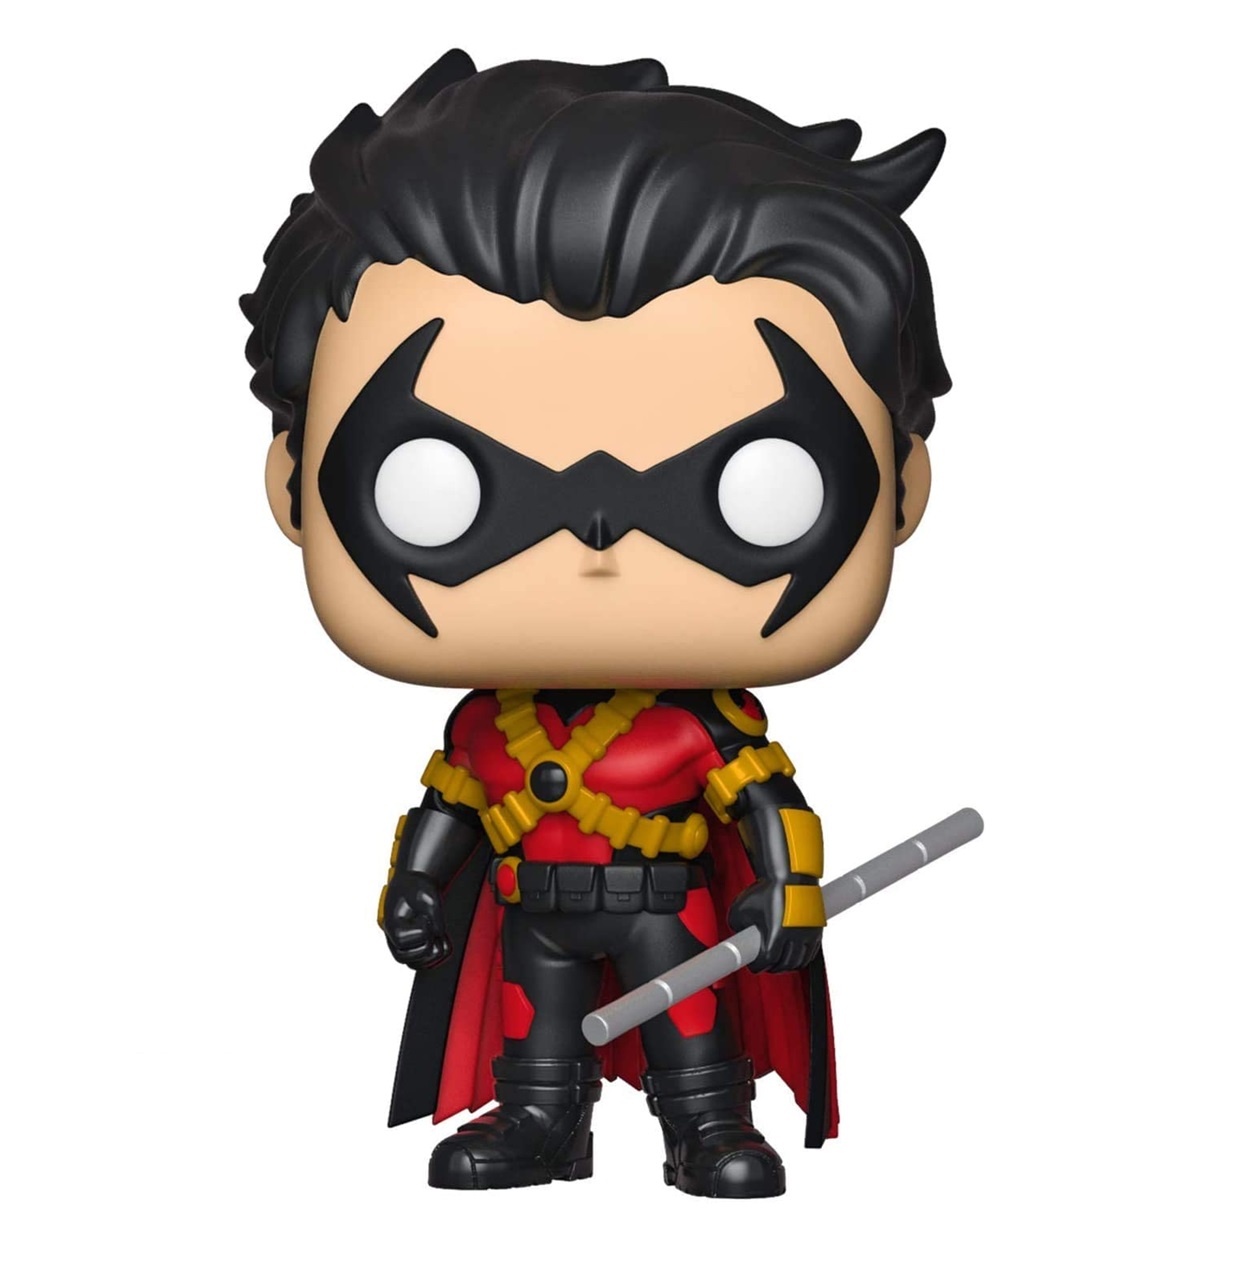 Red Wing Robin #274 Dc Super Heroes Funko Pop! Hot Topic